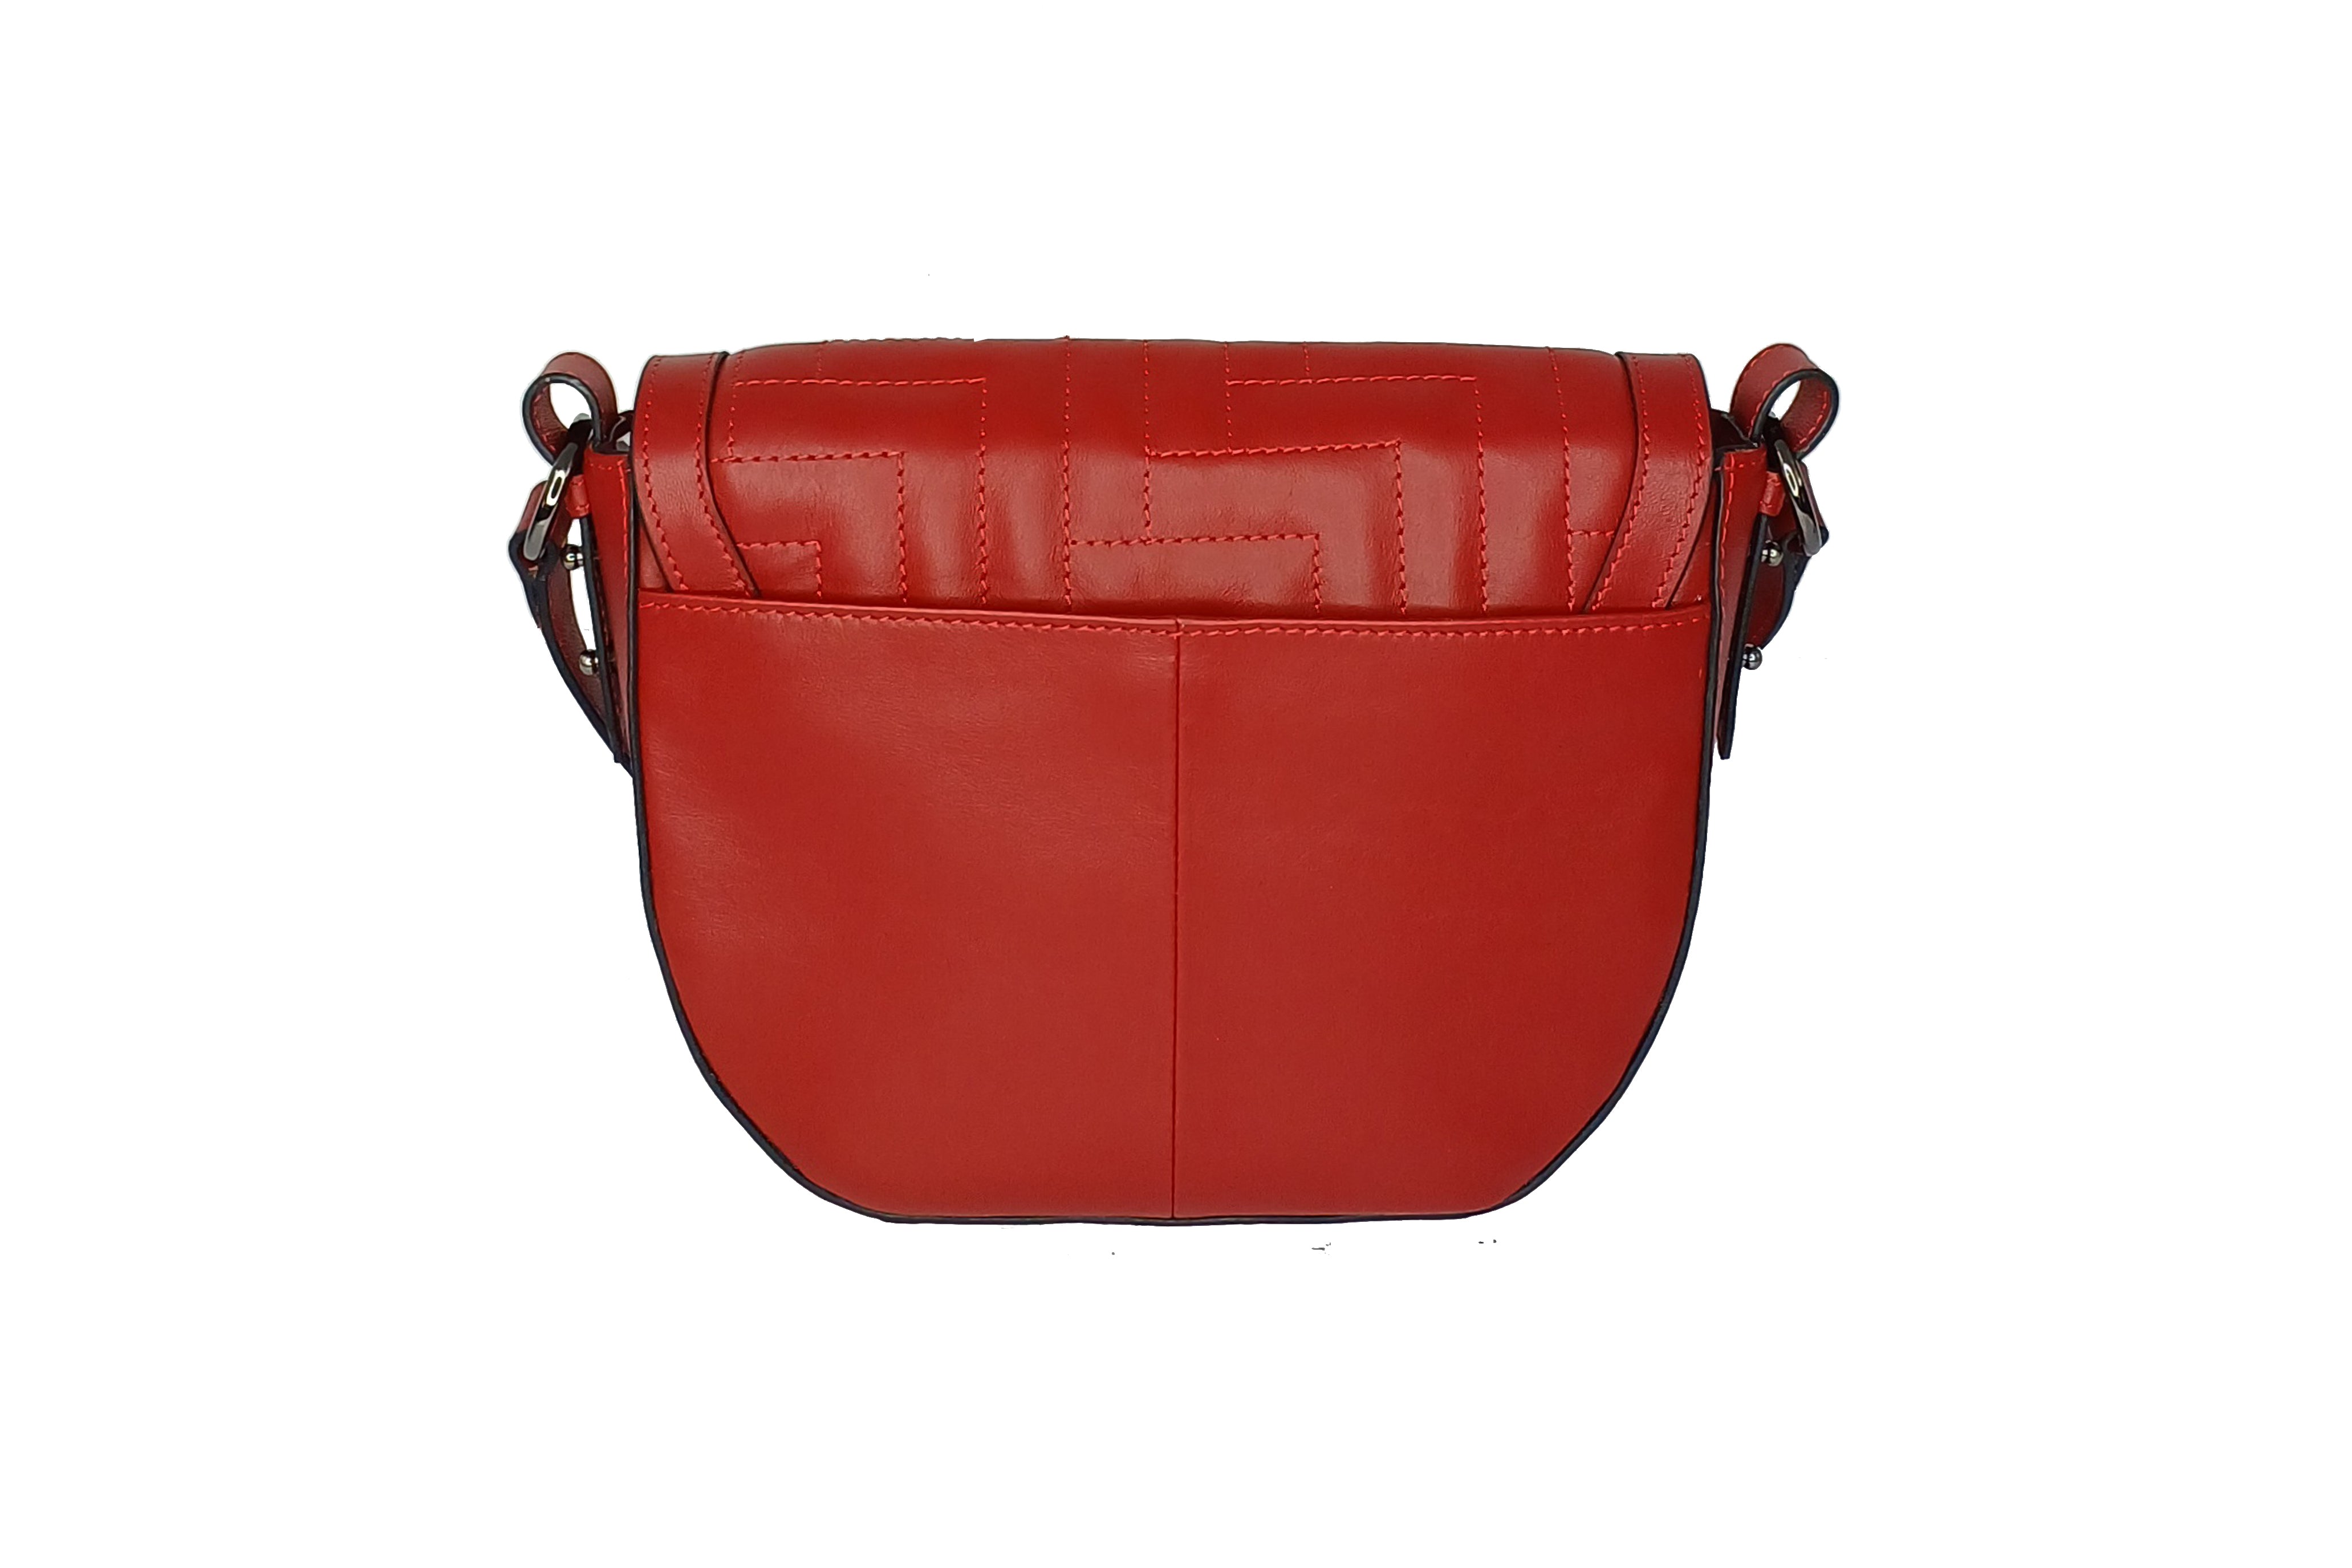 Shop Stylish & Functional Everyday Shoulder Bag at Lodis Now